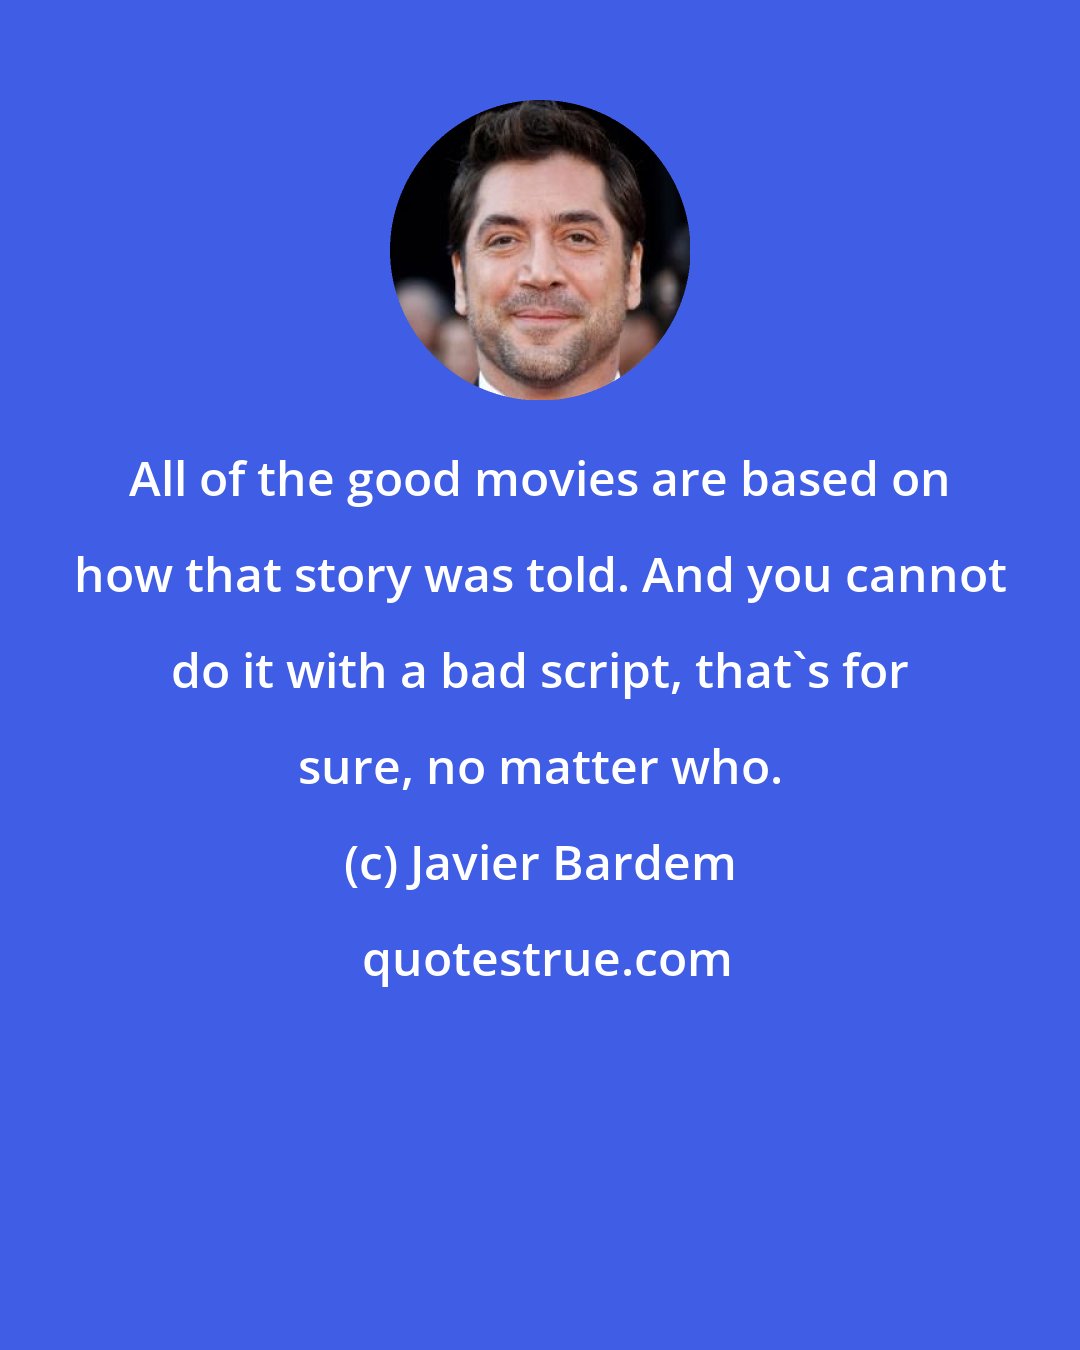 Javier Bardem: All of the good movies are based on how that story was told. And you cannot do it with a bad script, that's for sure, no matter who.